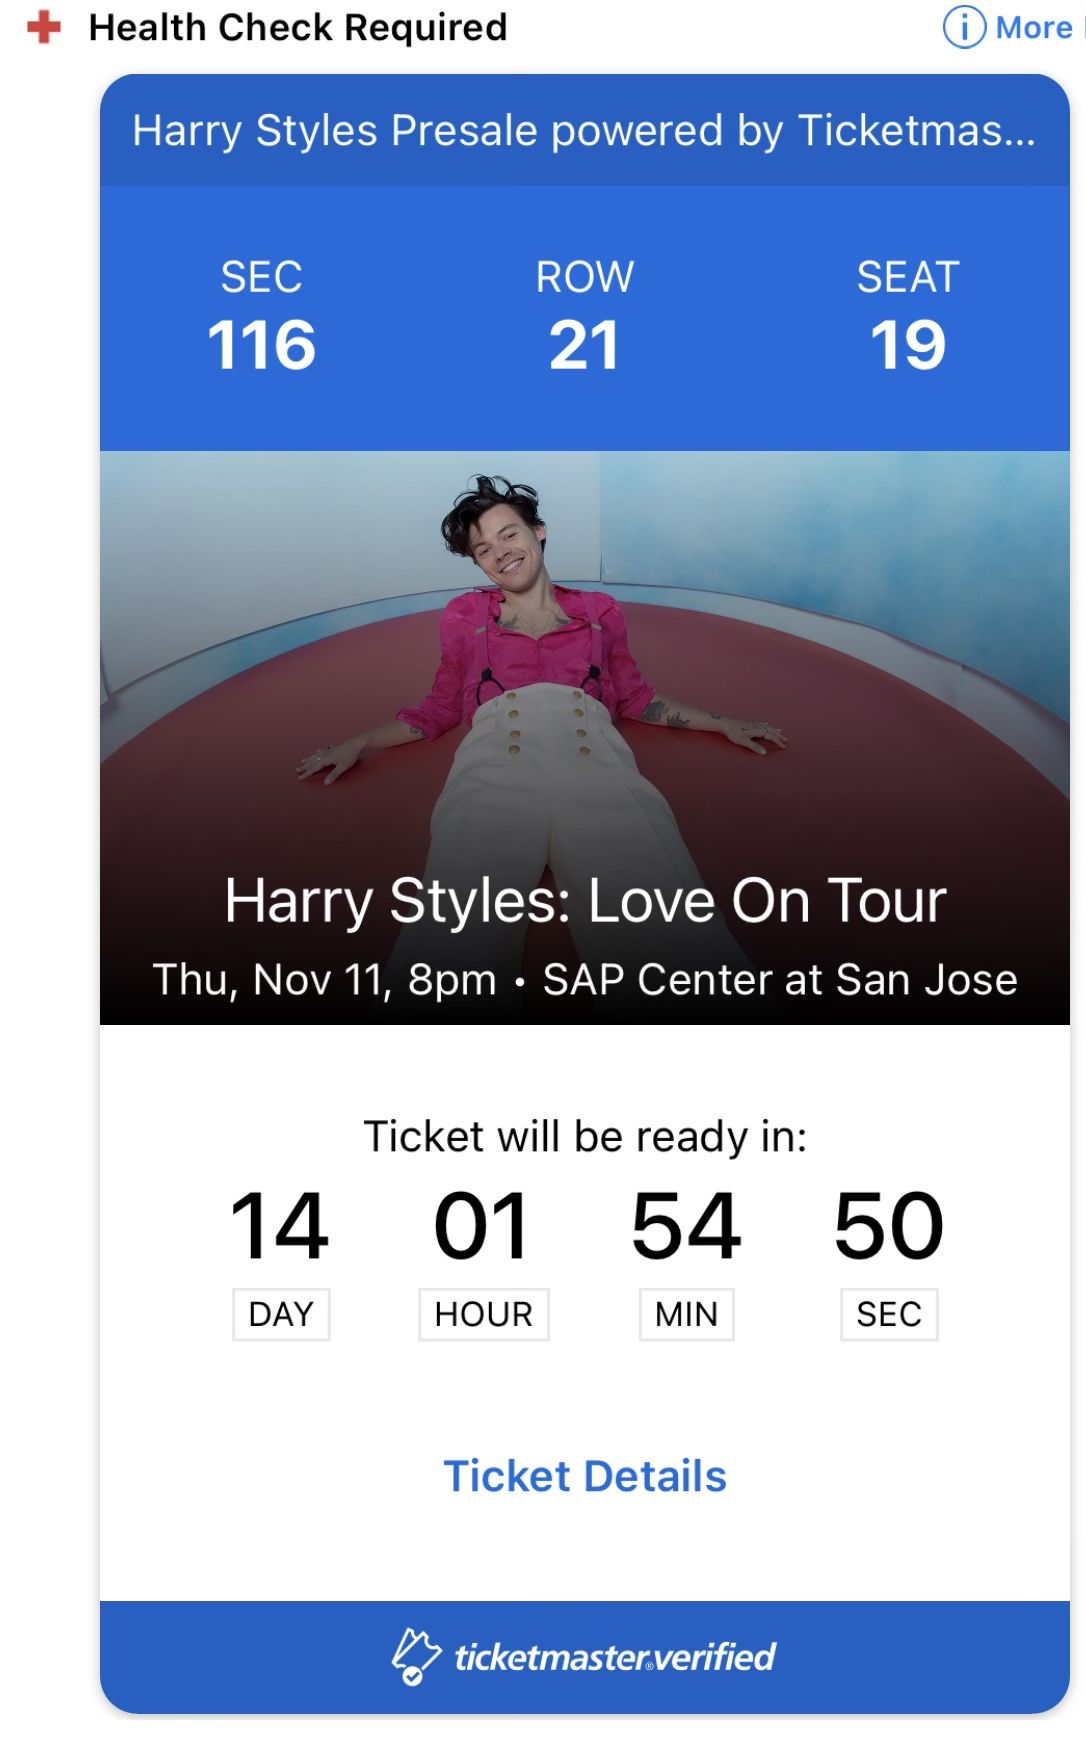 Harry Styles Love on Tour tickets, price in description (3 concert tickets)